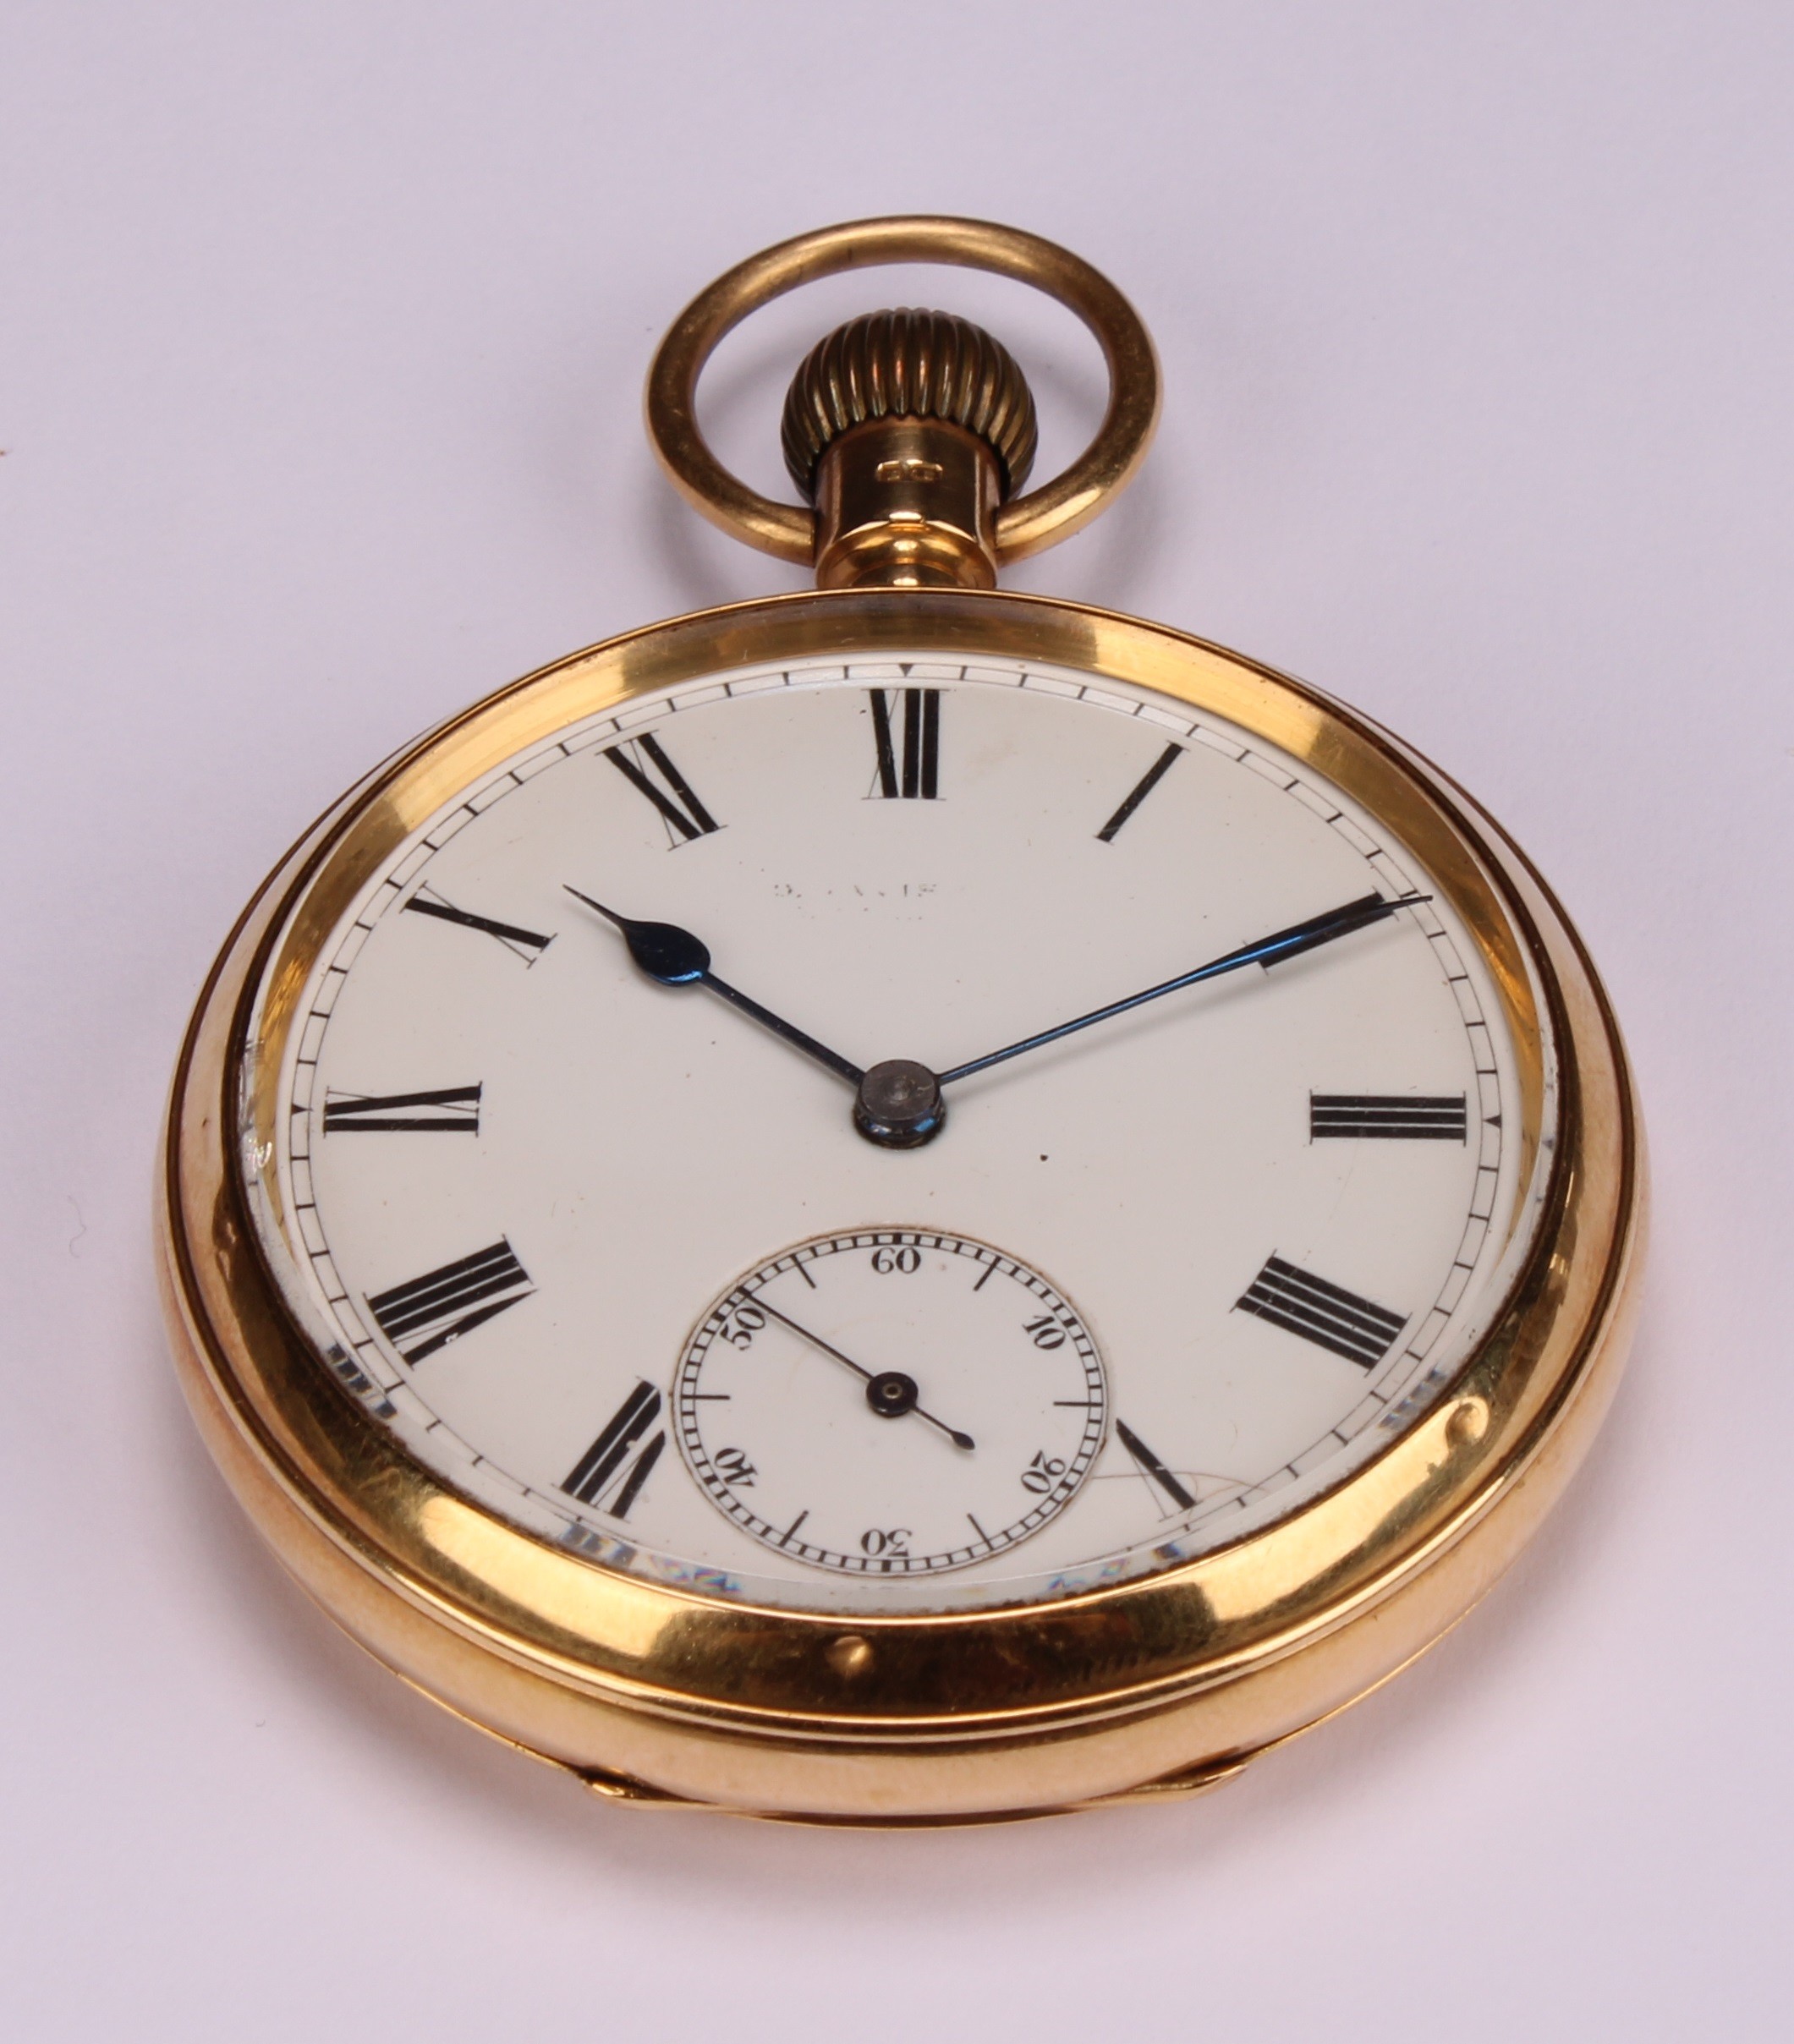 An 18ct gold open face pocket watch, white enamel dial, Roman numerals, subsidiary seconds dial with - Image 2 of 6